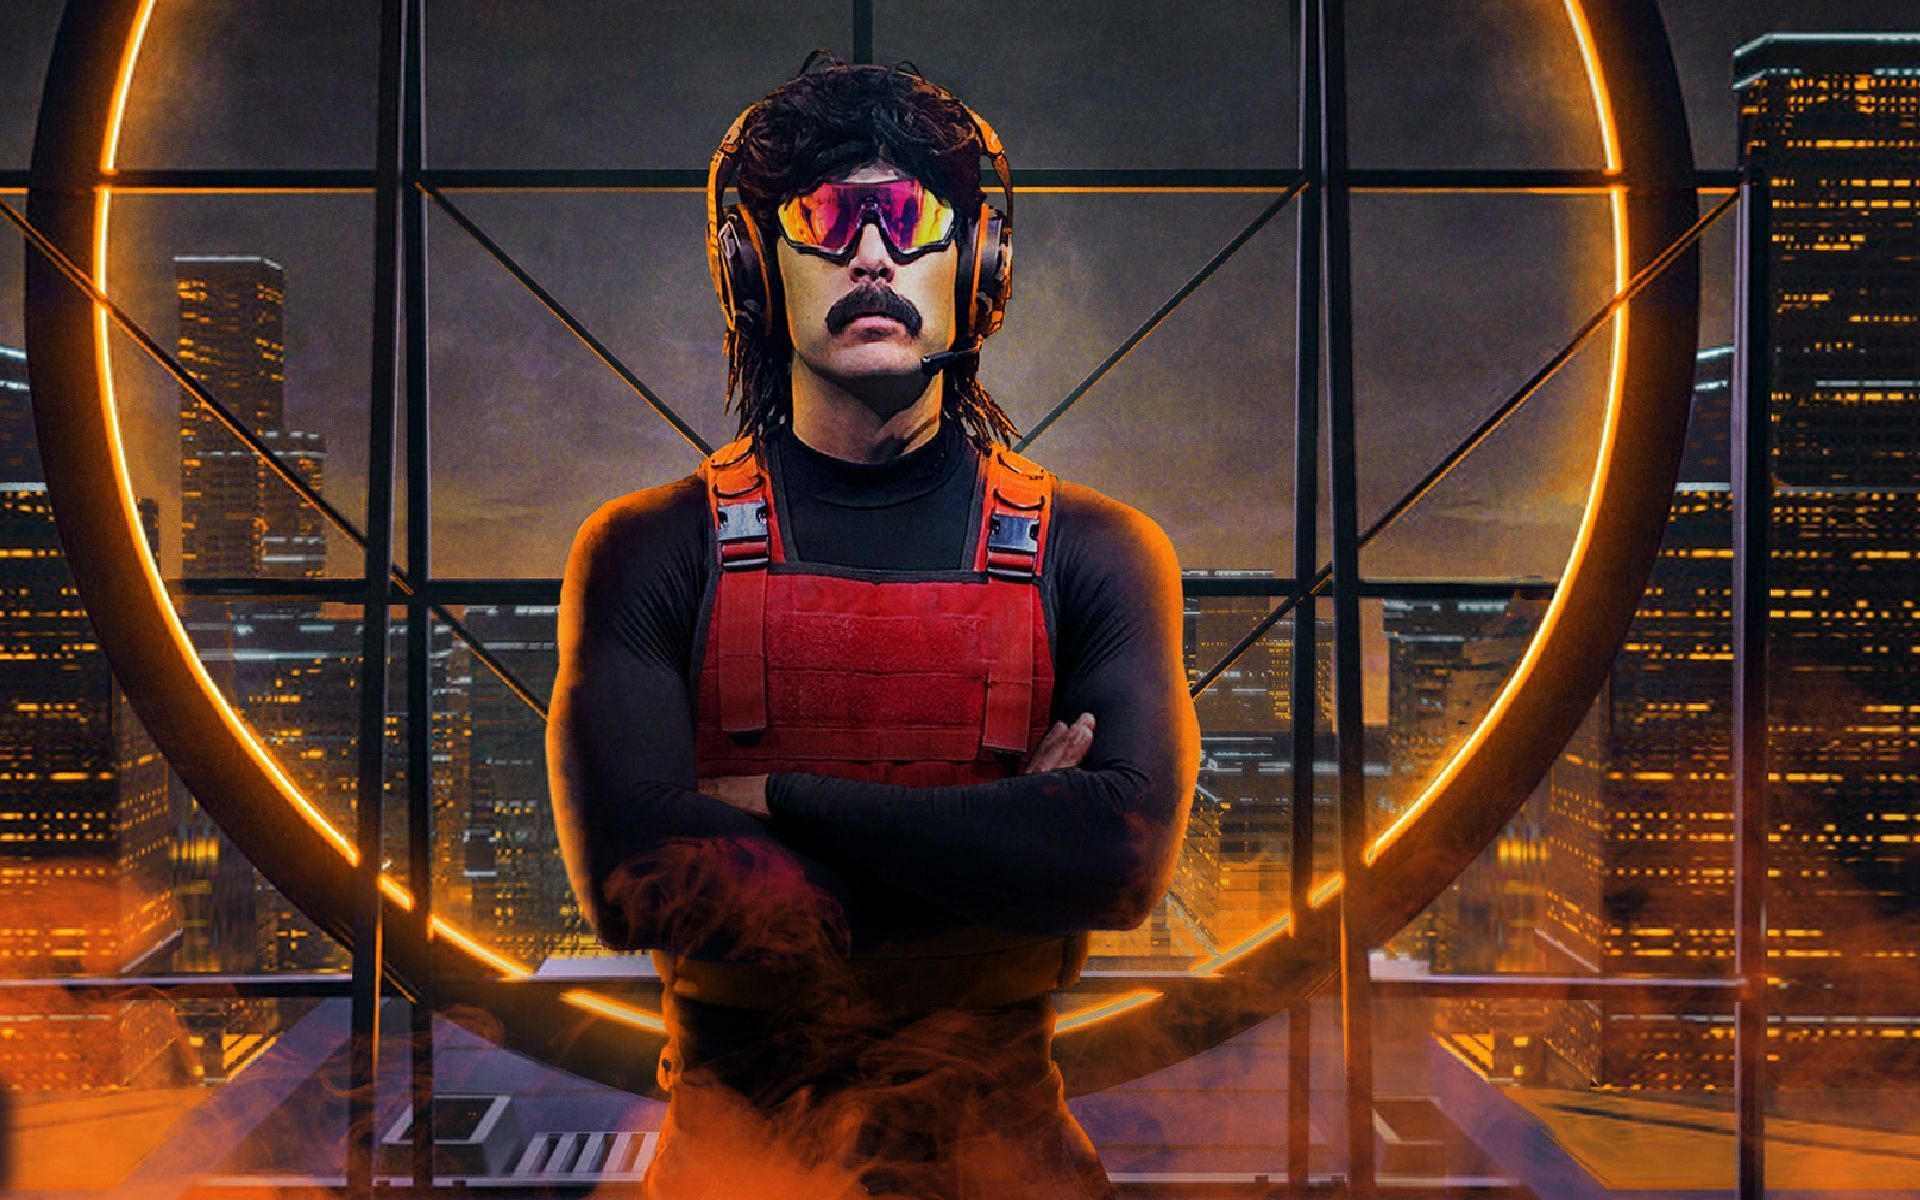 Dr DisRespect shares this thoughts regarding The Stream Awards 2022 (Images via DrDisRespect/YouTube)